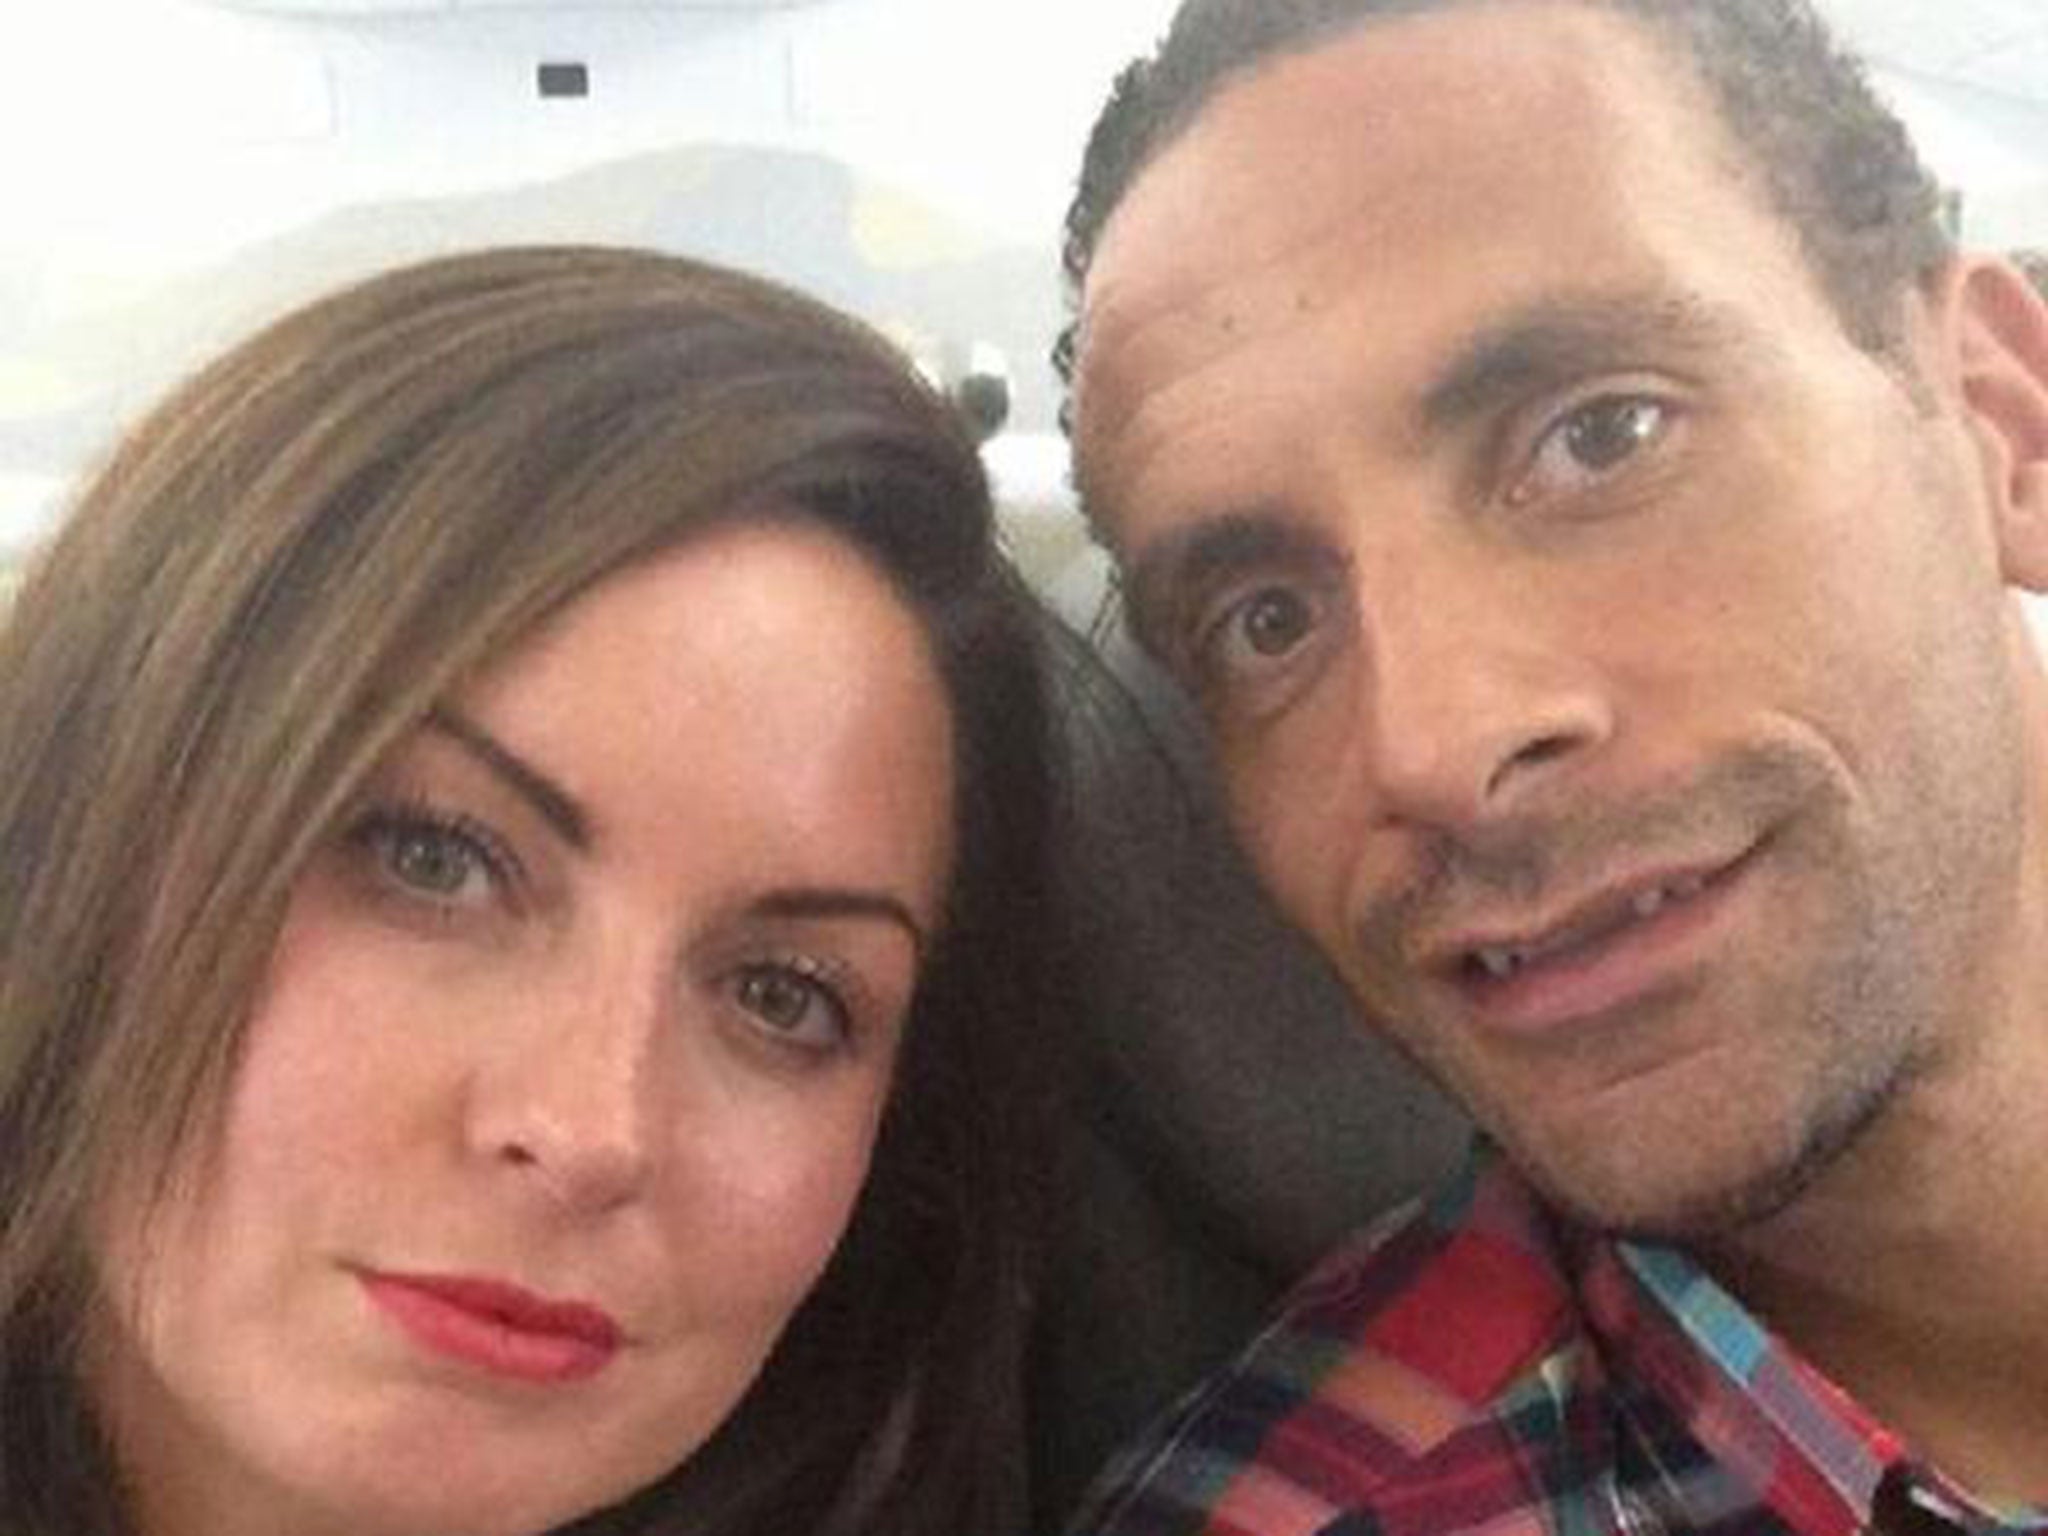 Rio Ferdinand S Wife Rebecca Ellison Dies From Breast Cancer The Independent The Independent